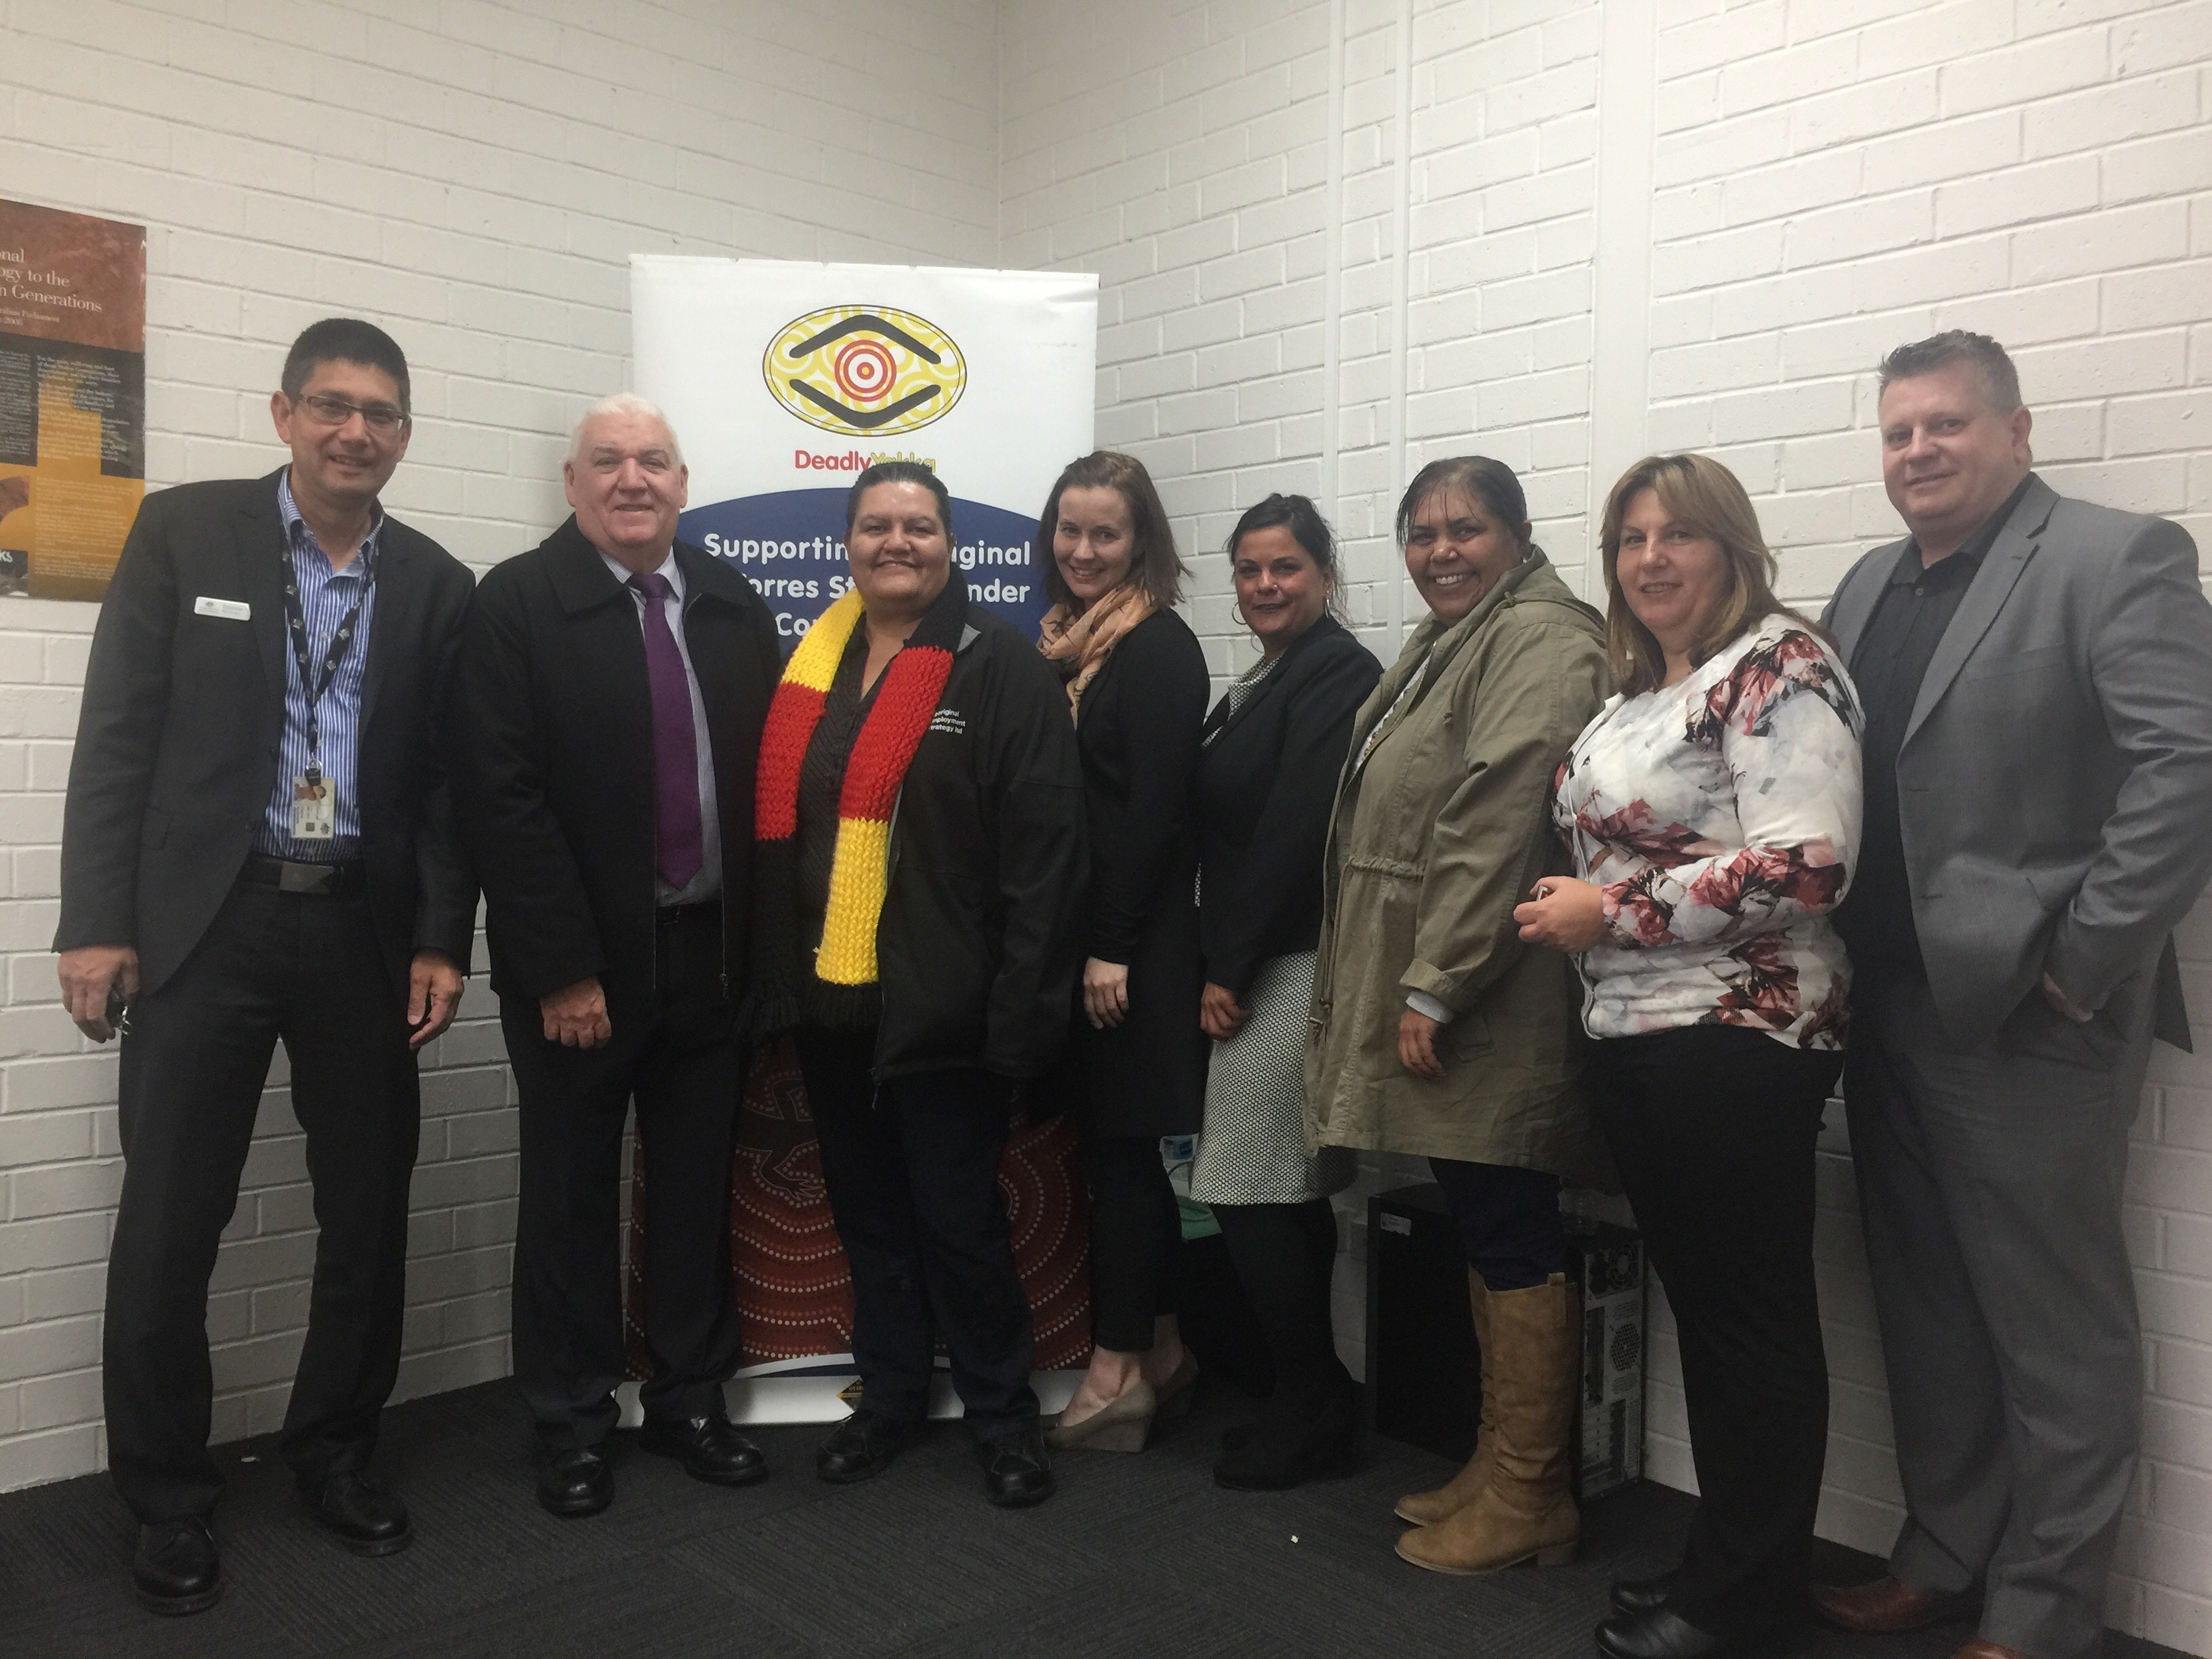 MatchWorks and ESG team members with special guests at the Deadly Yakka launch for Belconnen, ACT.